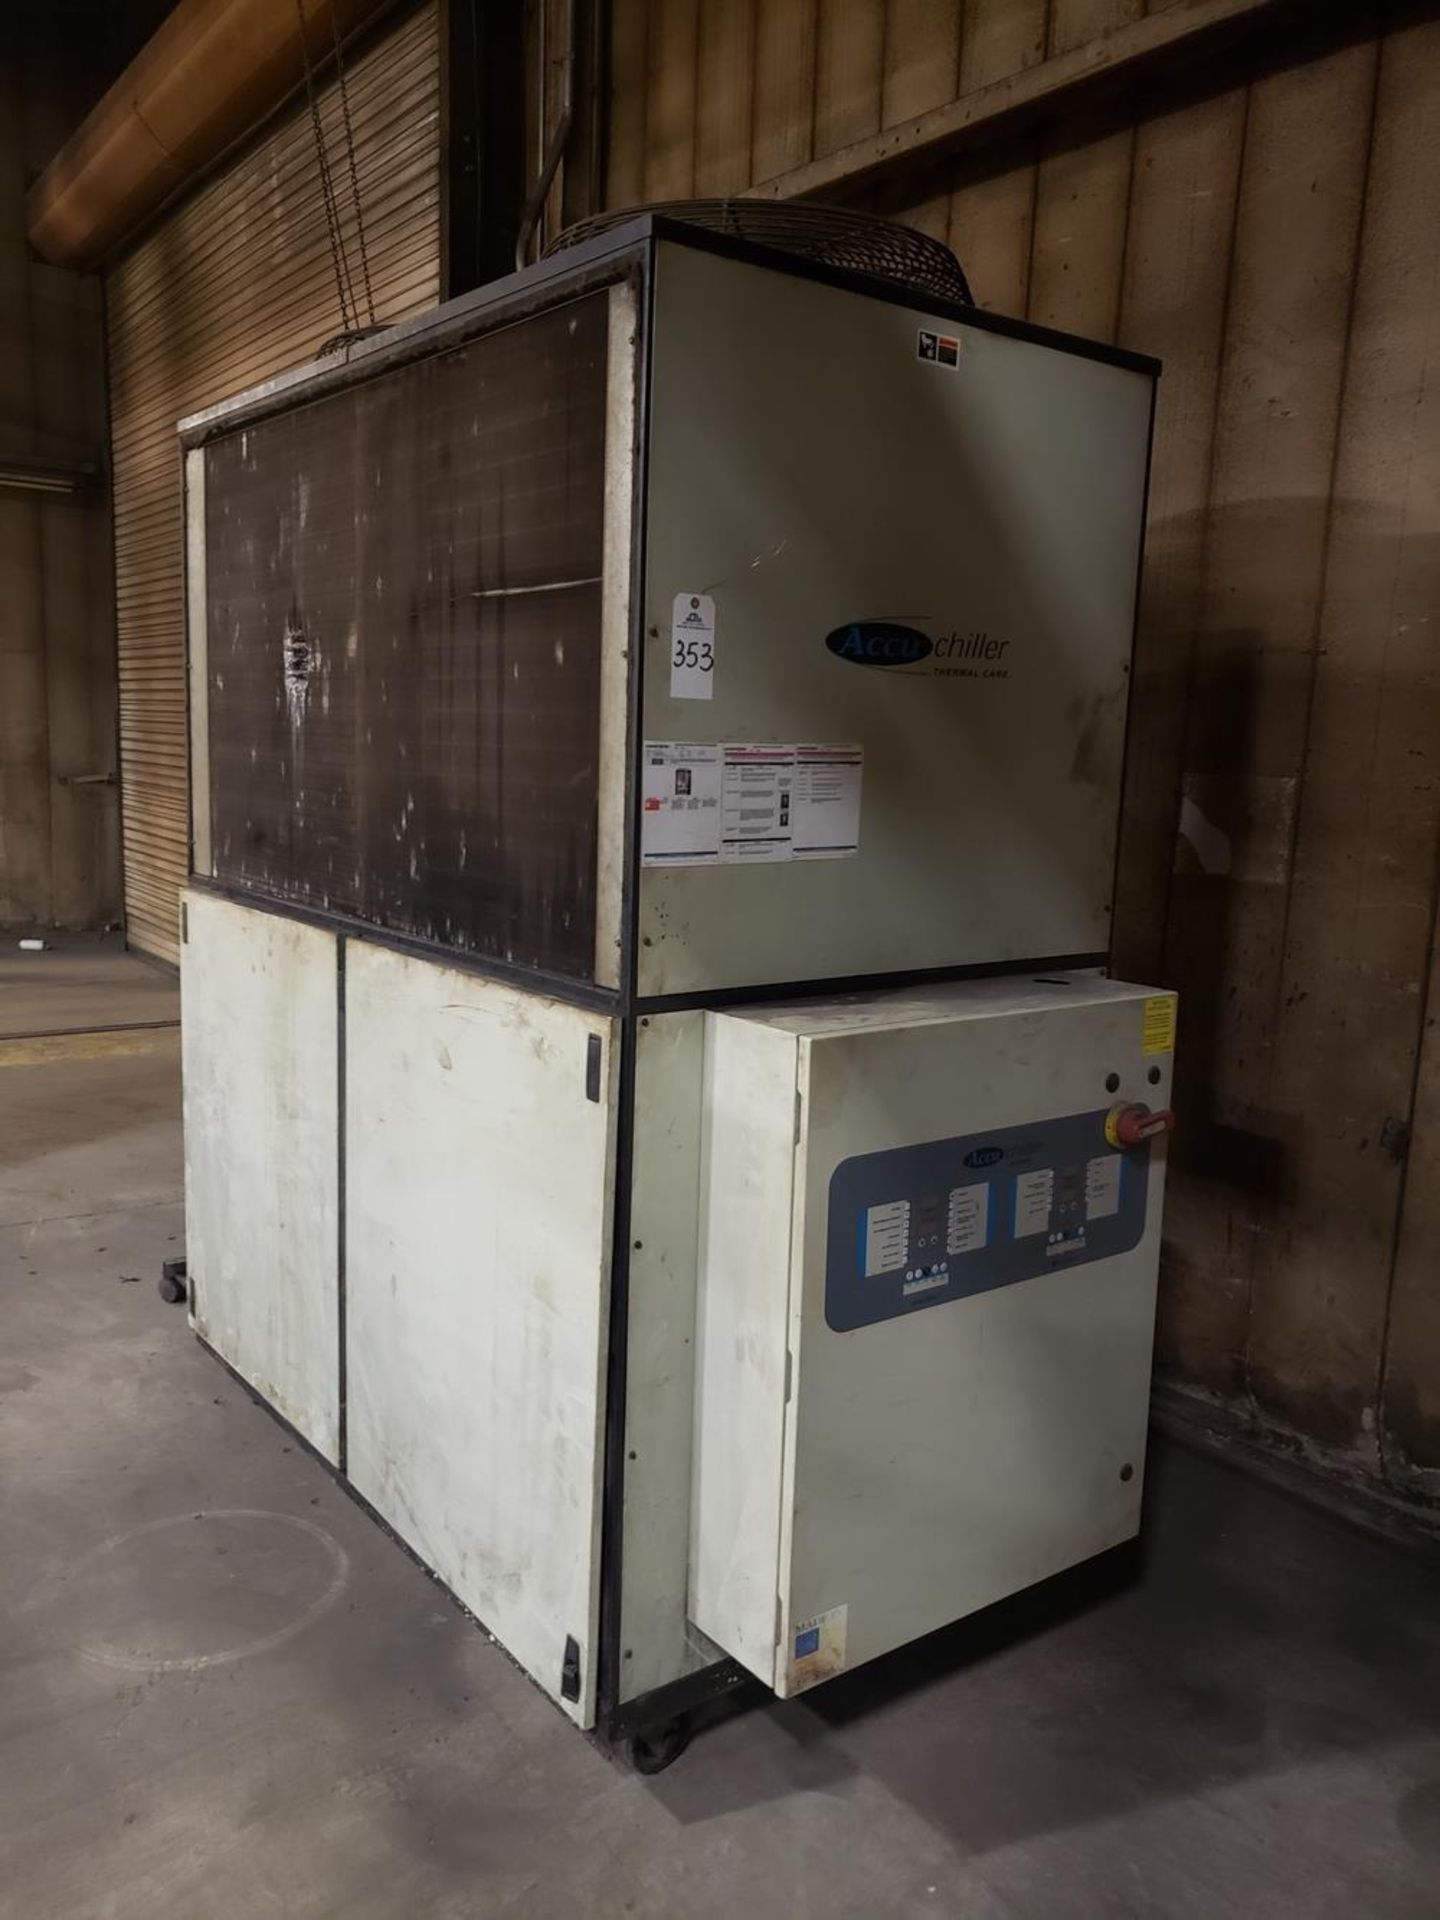 Thermal Care Accu Chiller, M# LQ2A2003LXB, S/N 13422010608 | Rig Fee: $125